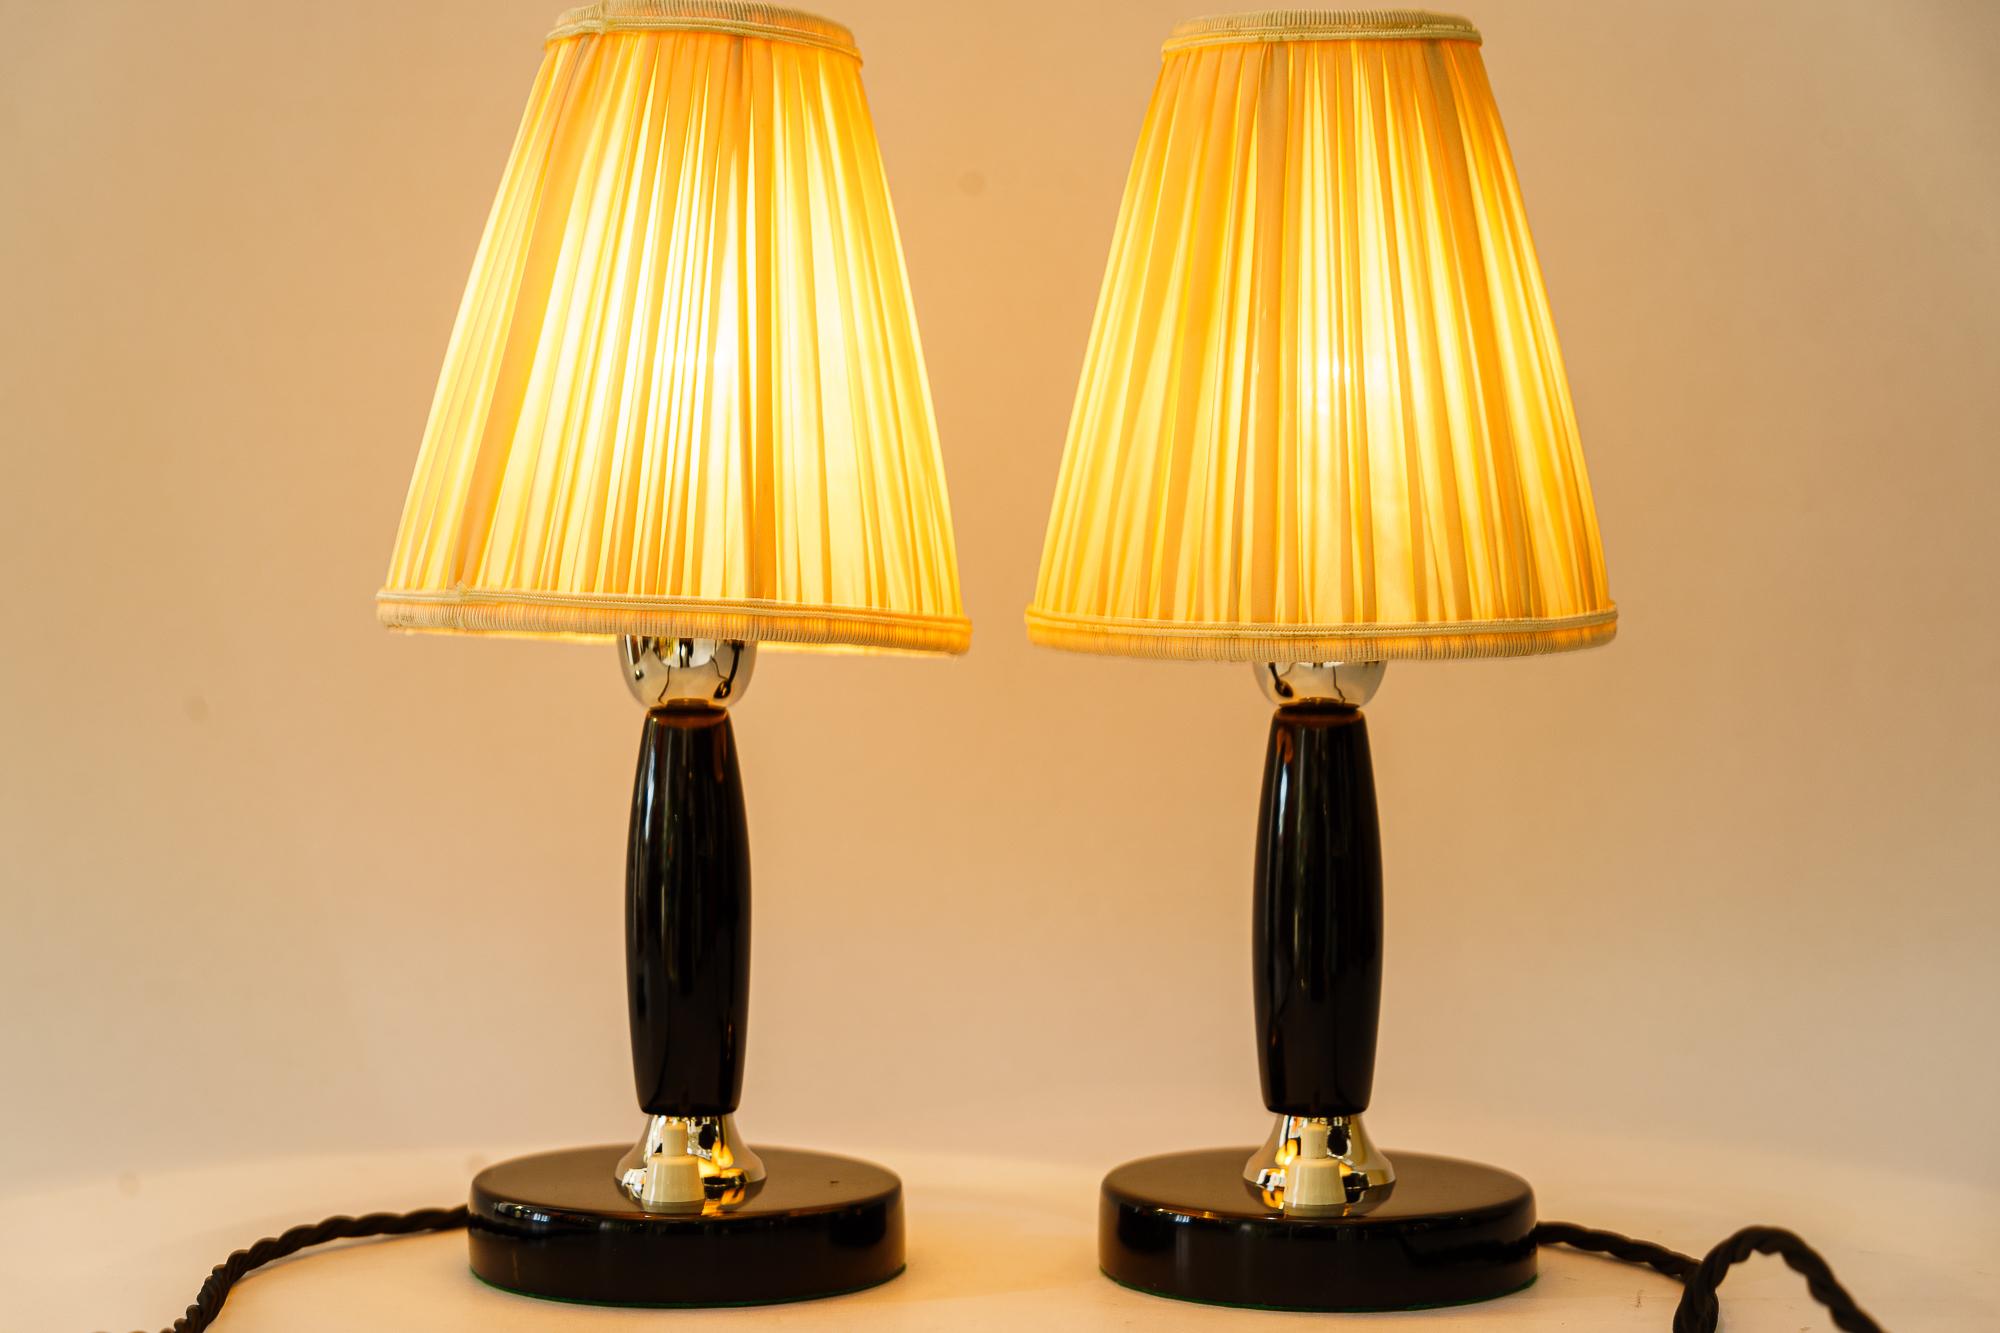 2x Art Deco wood Table Lamps vienna around 1930s and fabric shade
Nickel plated parts
Wood blackened and polished
The fabric shades are replaced ( new )
Pair price